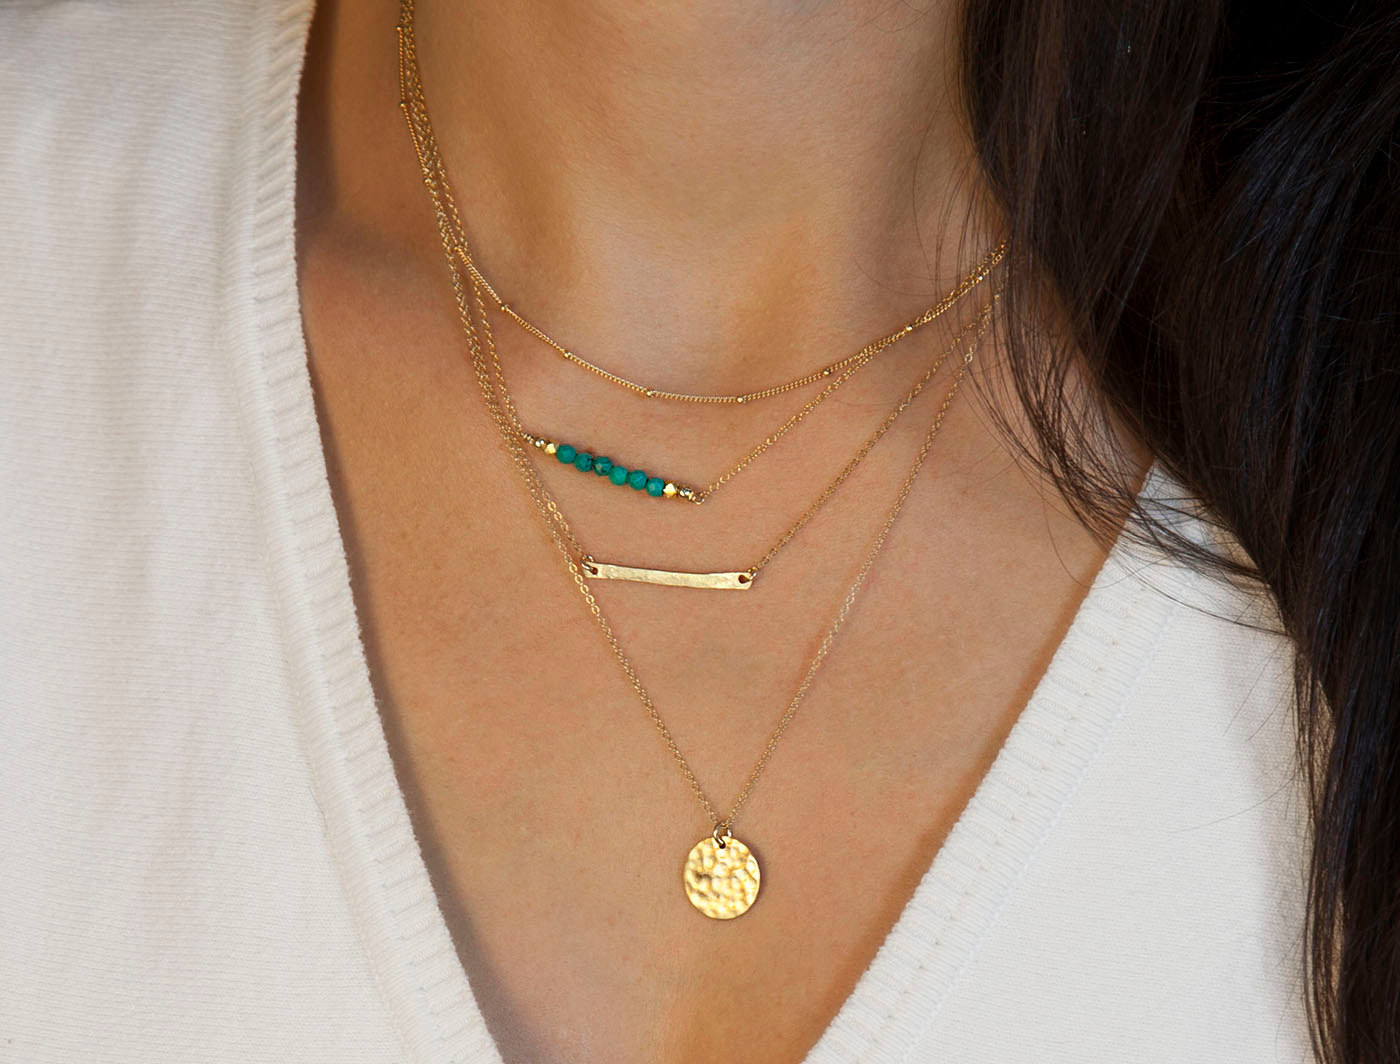 Delicate Layered Necklaces, Set Of 3 / Thin Gold Chain, 14K Gold Fill / Dainty, Delicate Necklace Set